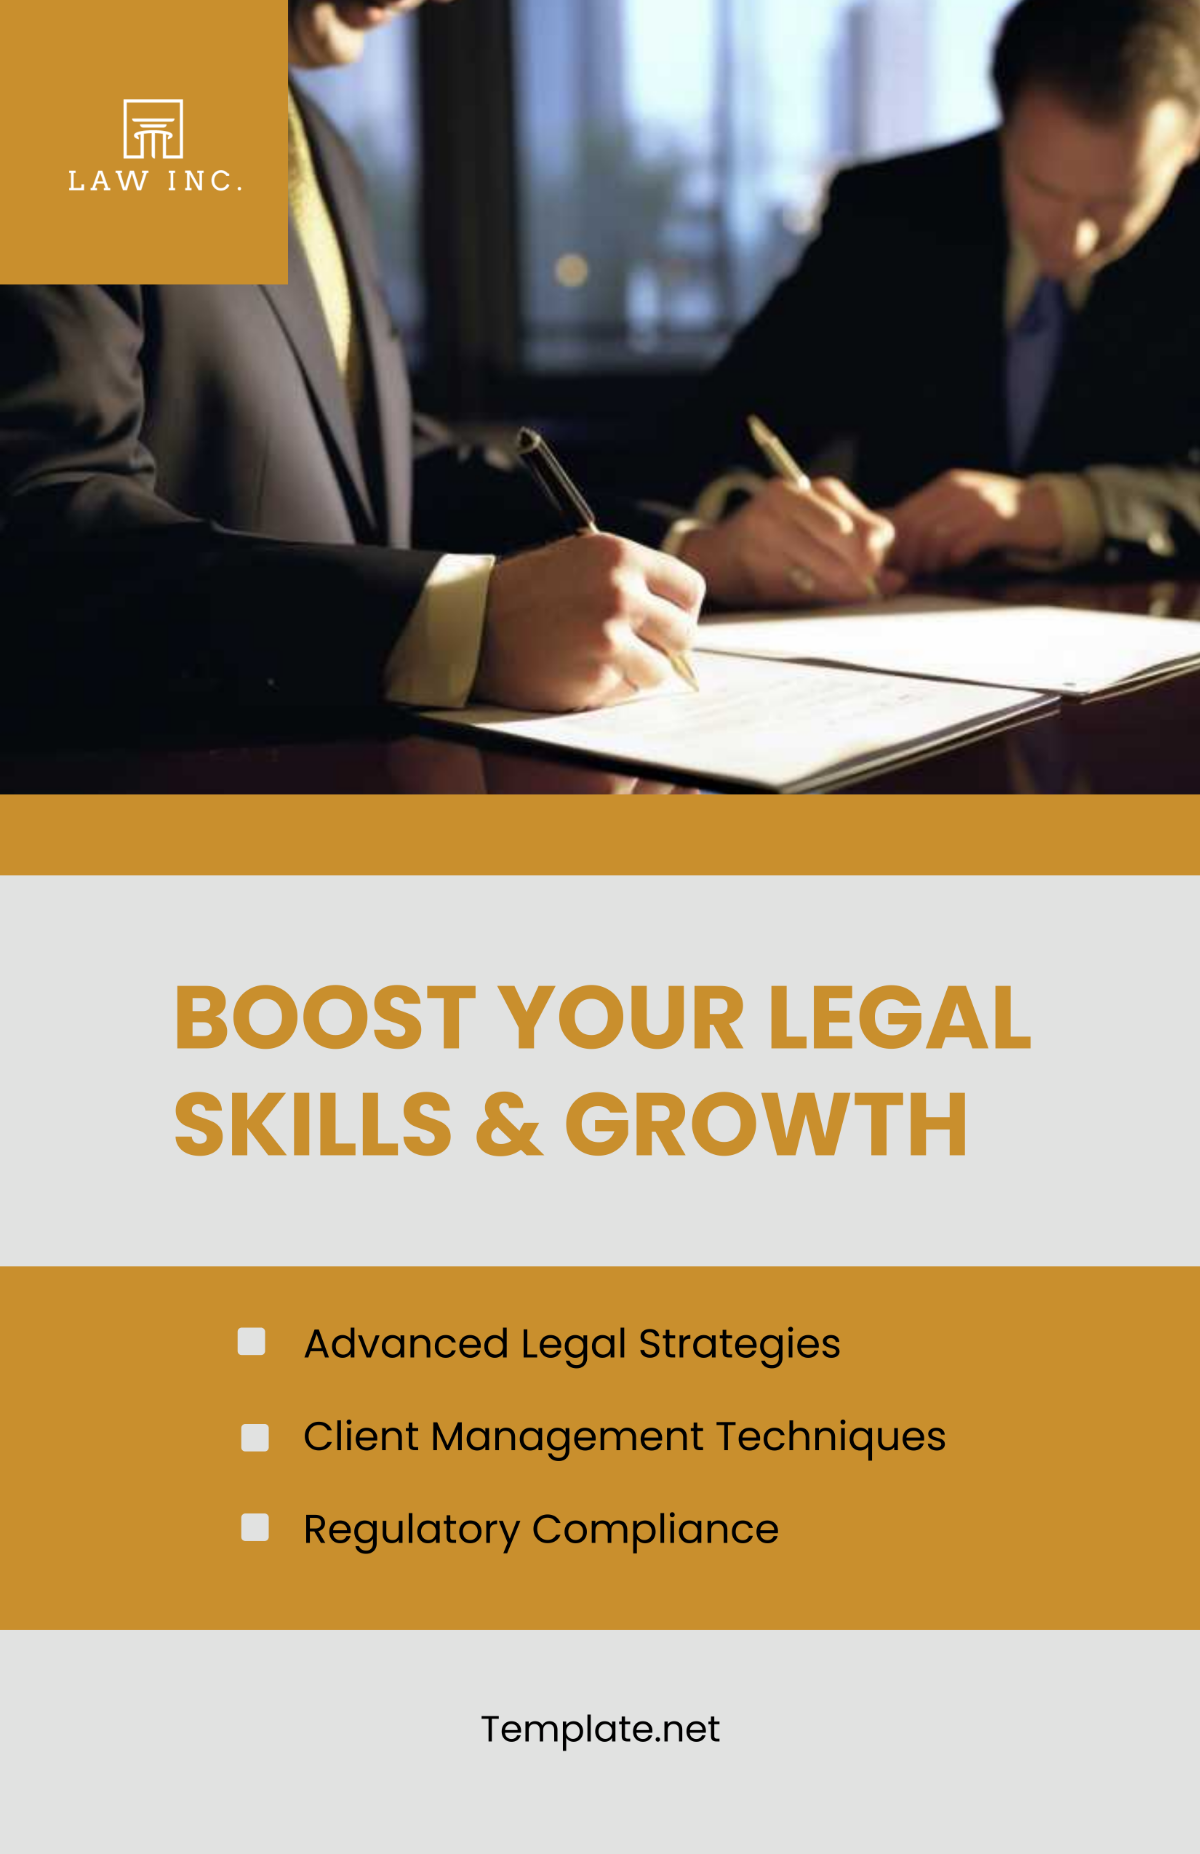 Law Firm Workshop Poster Template